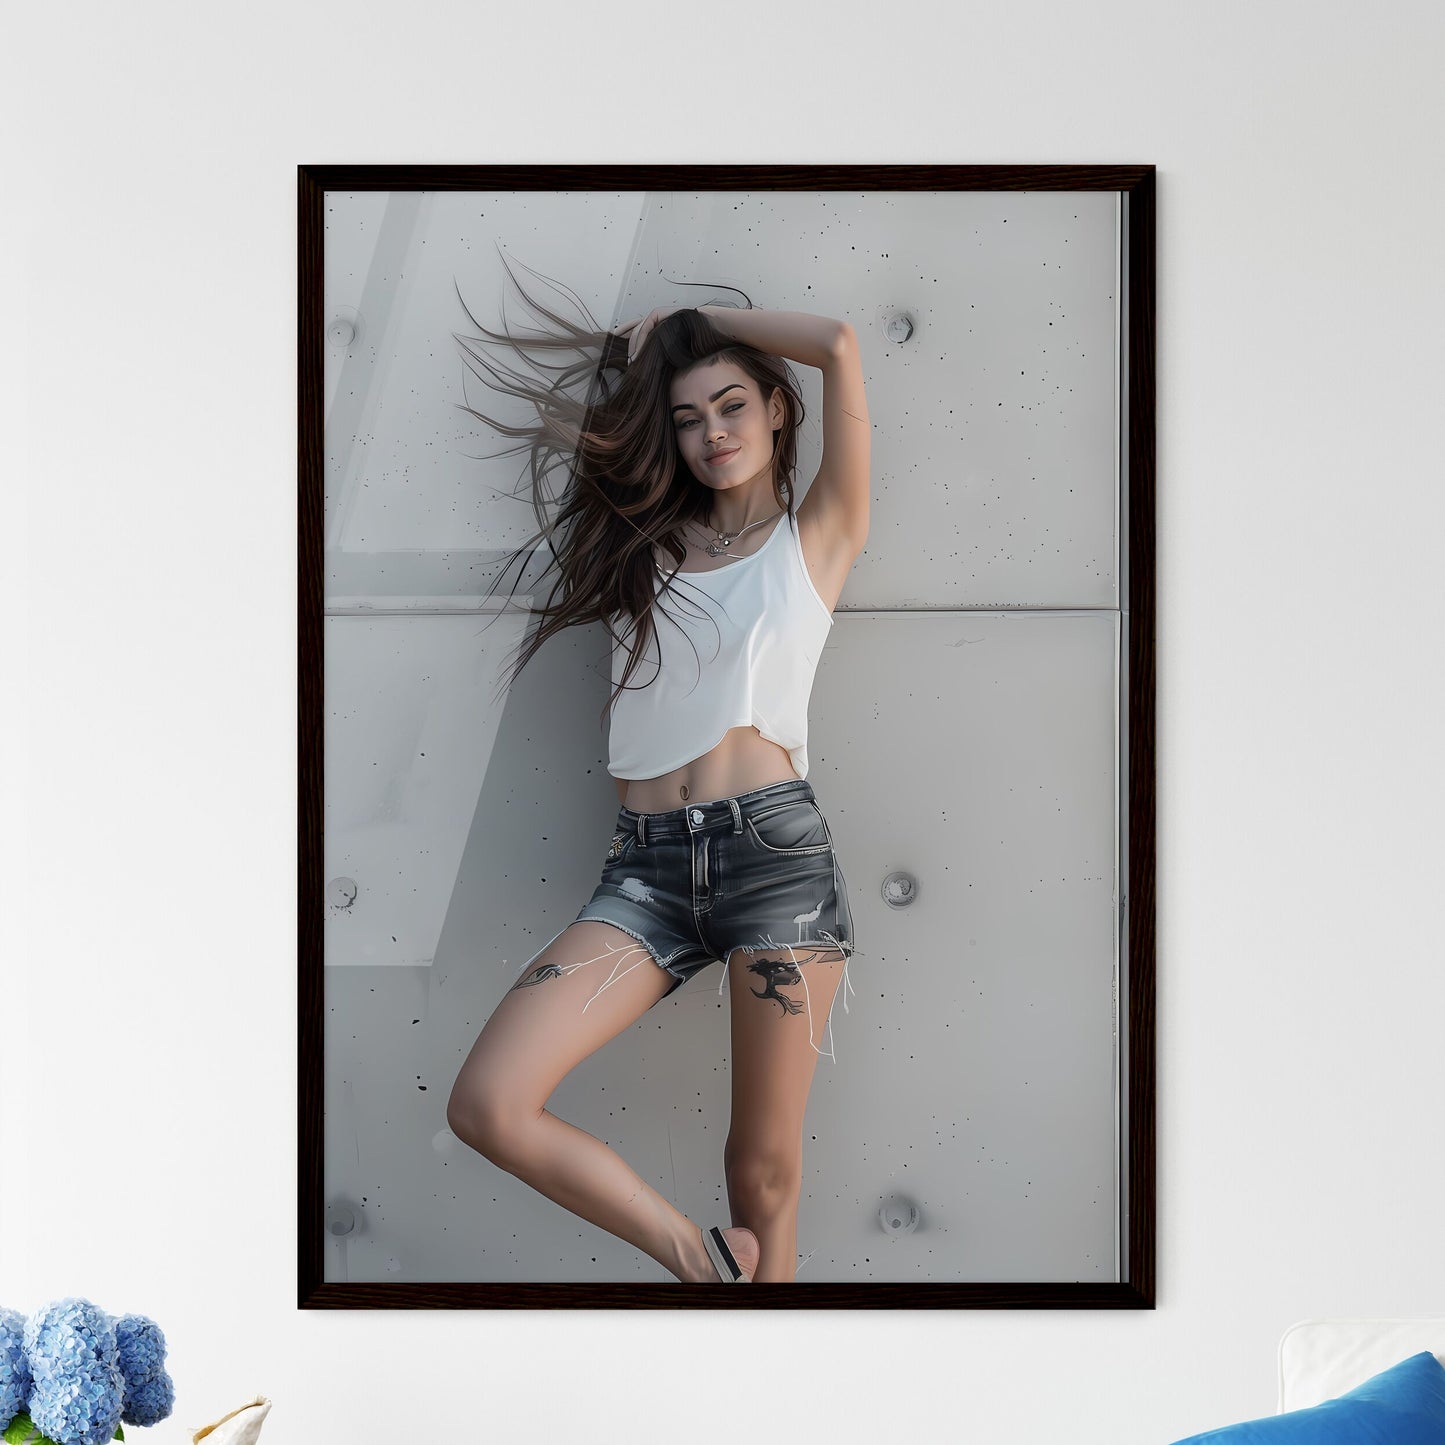 Vibrant painting on canvas with a woman in denim shorts and white tank top posing for a photoshoot art photography stock image Default Title